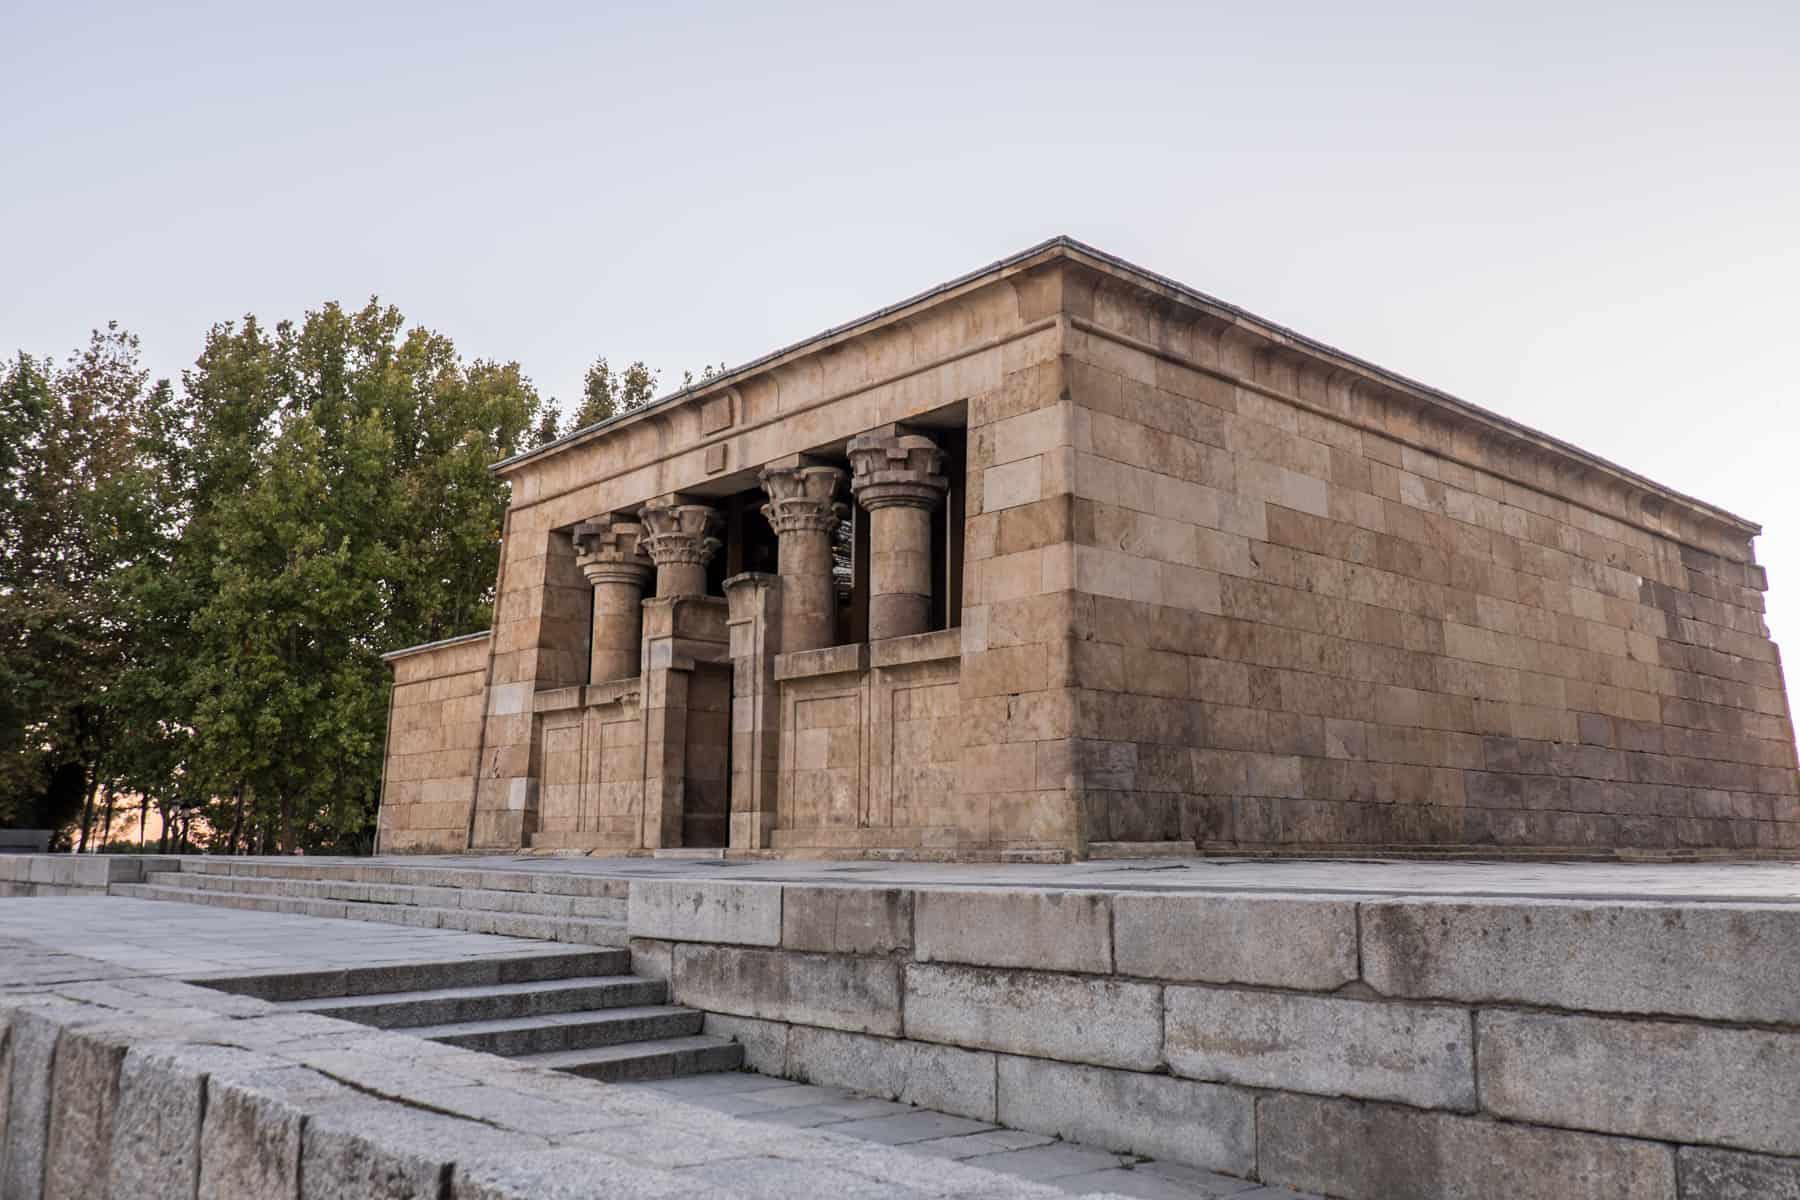 The golden stoned rectangular Egyptian Temple of Debod in Madrid, with four stone columns. The structure stands upon a surface of white stones, with a staircase. 